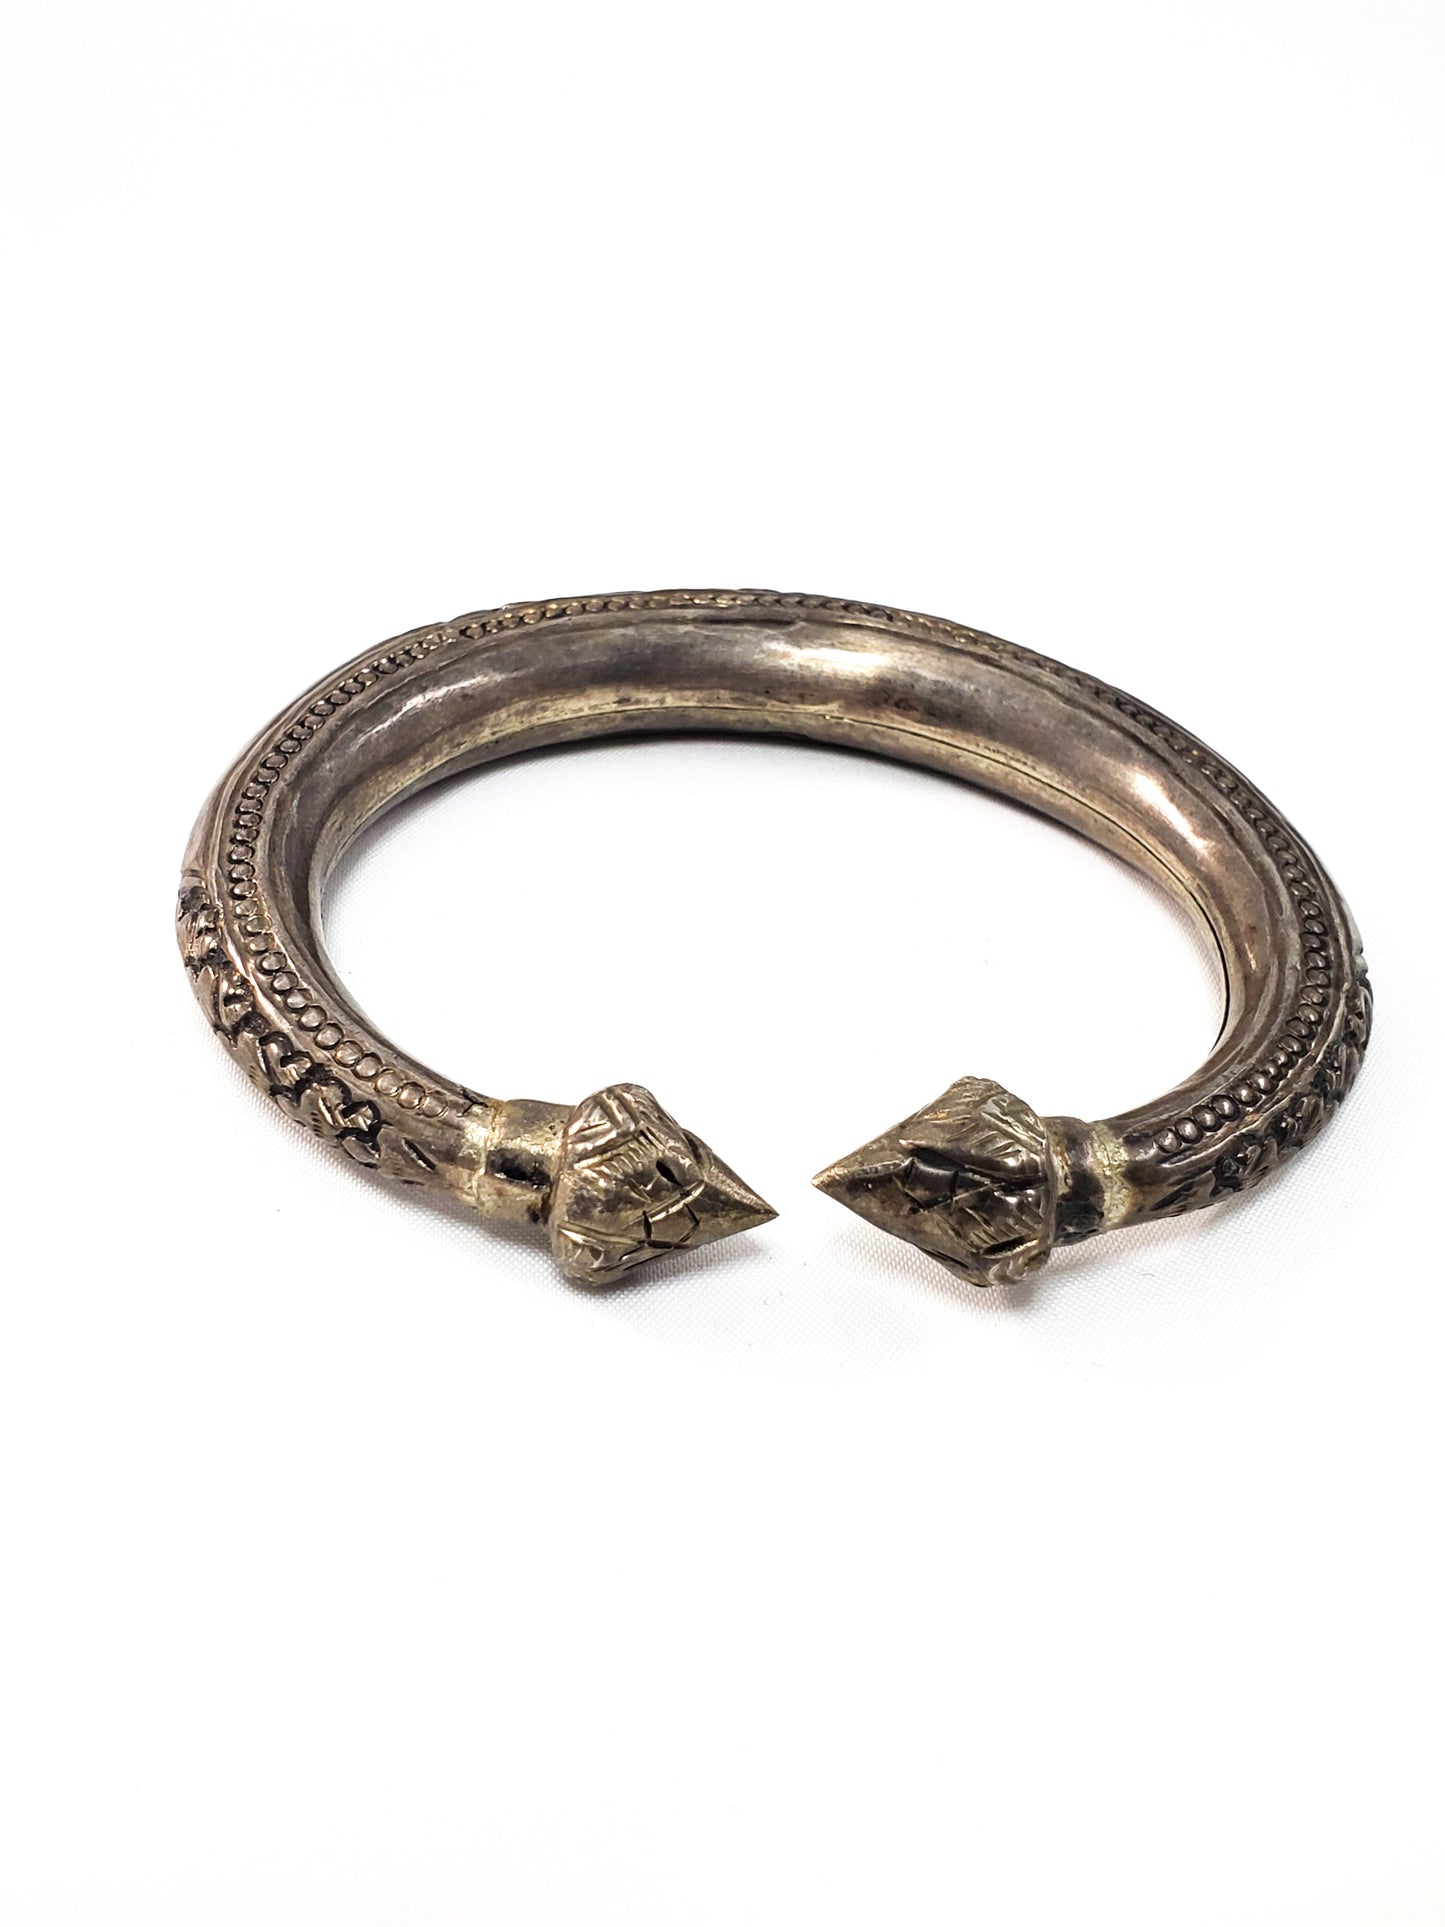 Ethnic Asian Lotus Flower Hill Tribe Golden Triangle antique 20th century sterling silver cuff bracelet